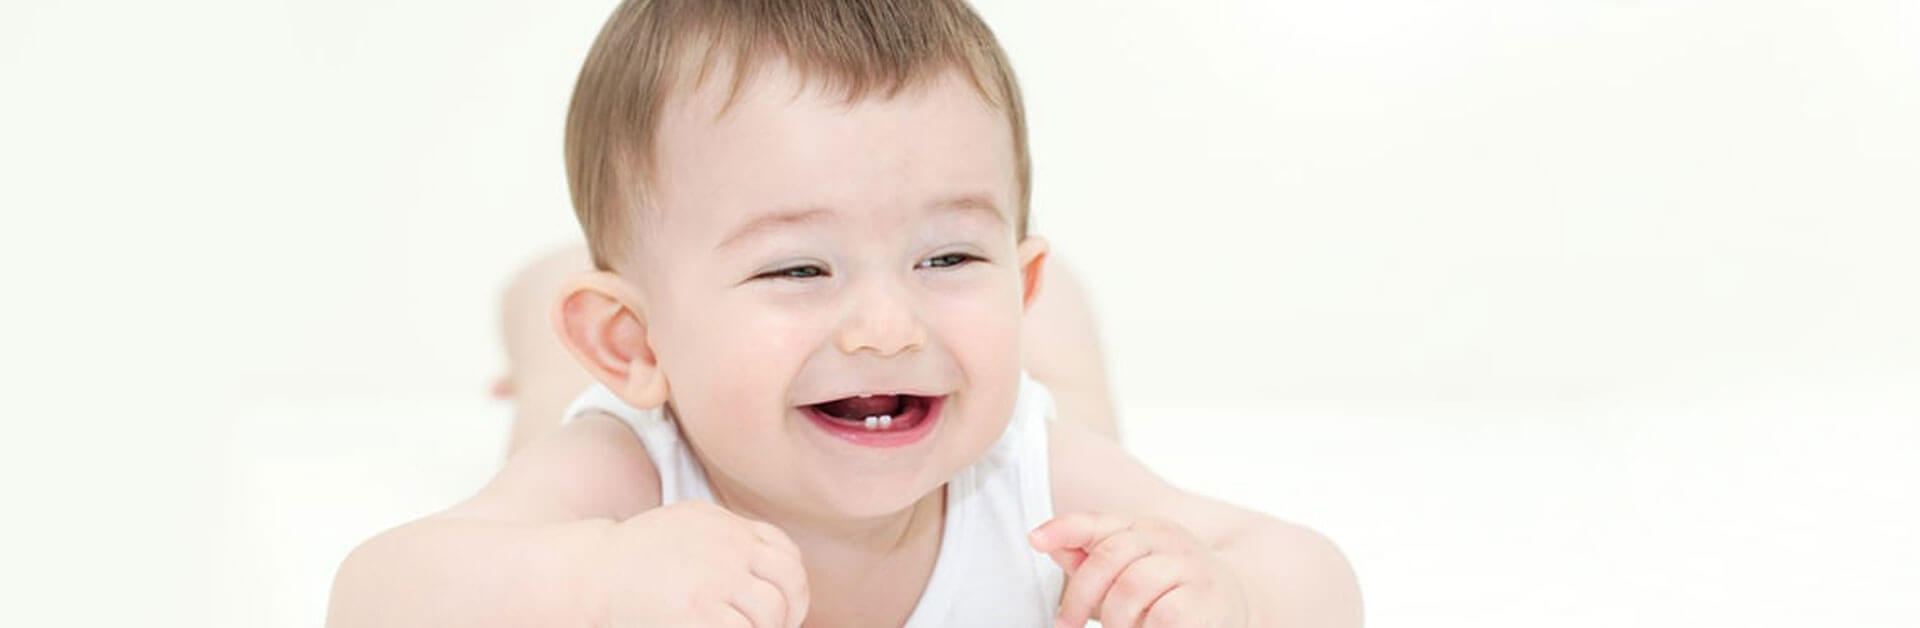 FAQ’S ON INFANT LASER TONGUE TIE RELEASE (FRENECTOMY)